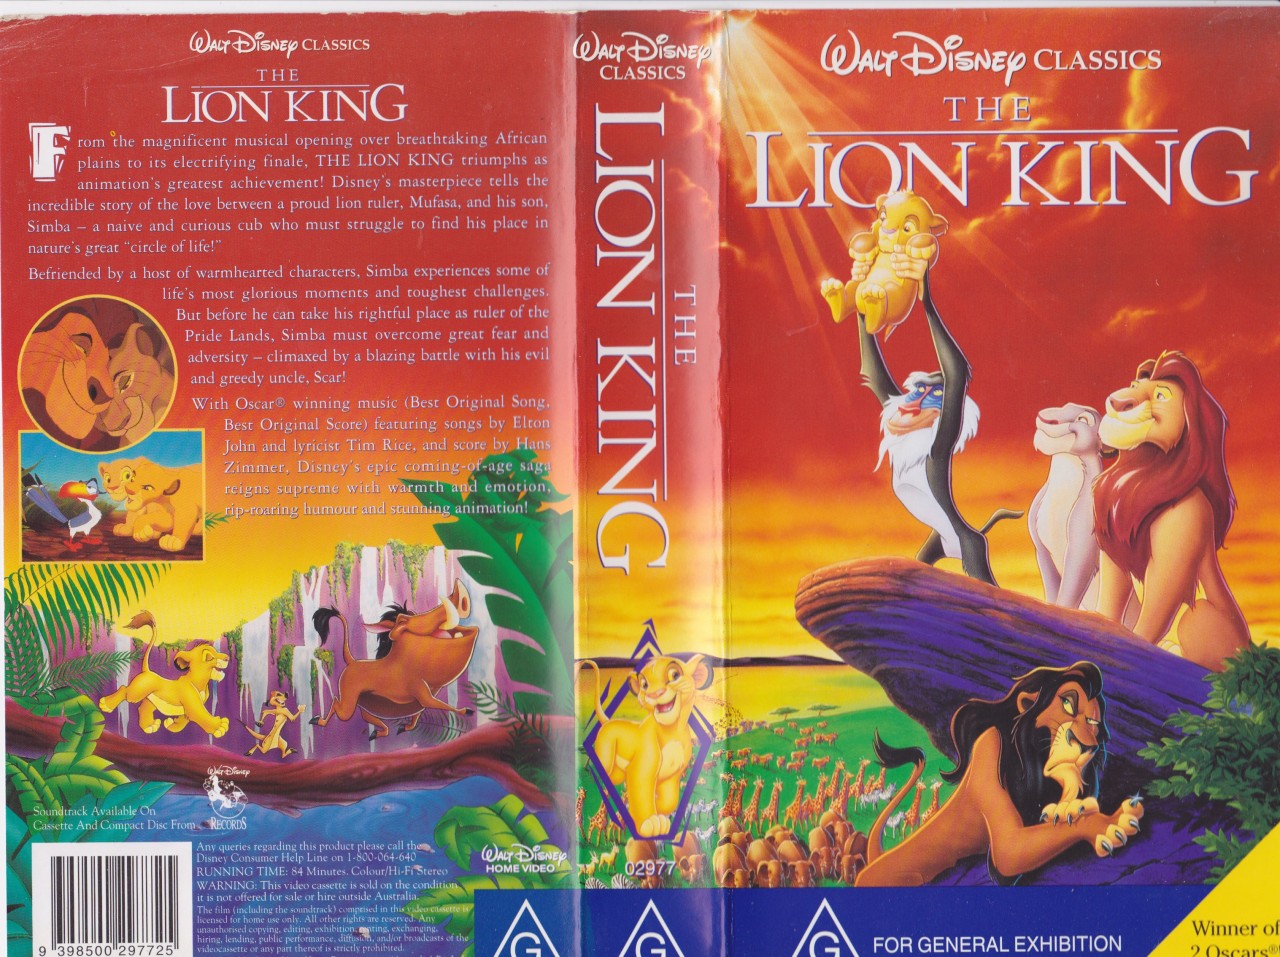 THE LION KING VIDEO VHS PAL VIDEO~ A RARE FIND | eBay